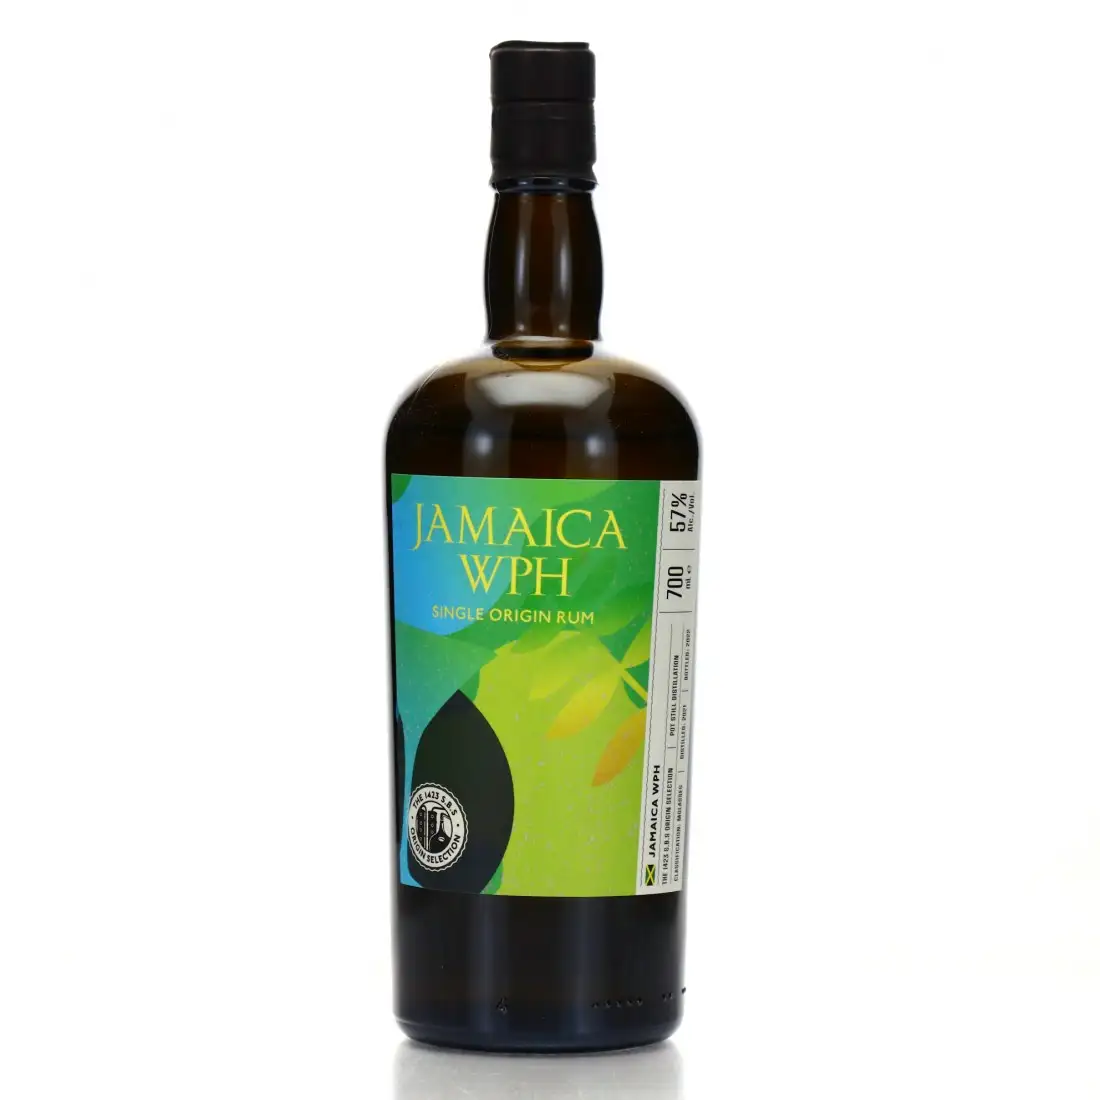 Image of the front of the bottle of the rum Jamaica WPH